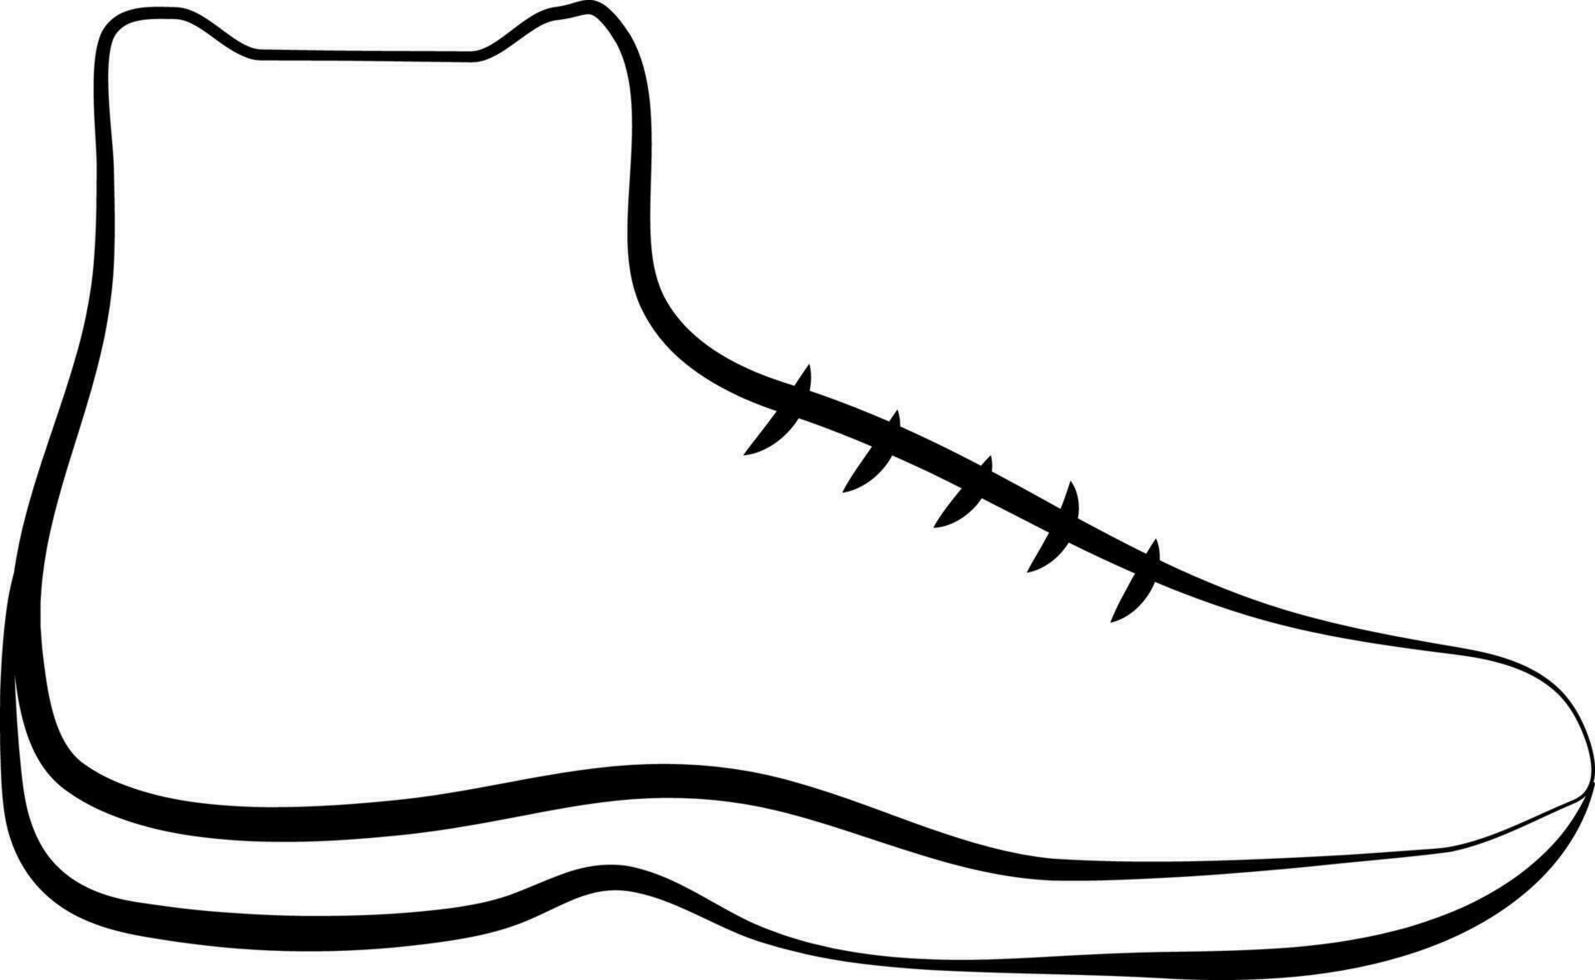 Black Thin Line Art Of Shoes Flat Icon. vector